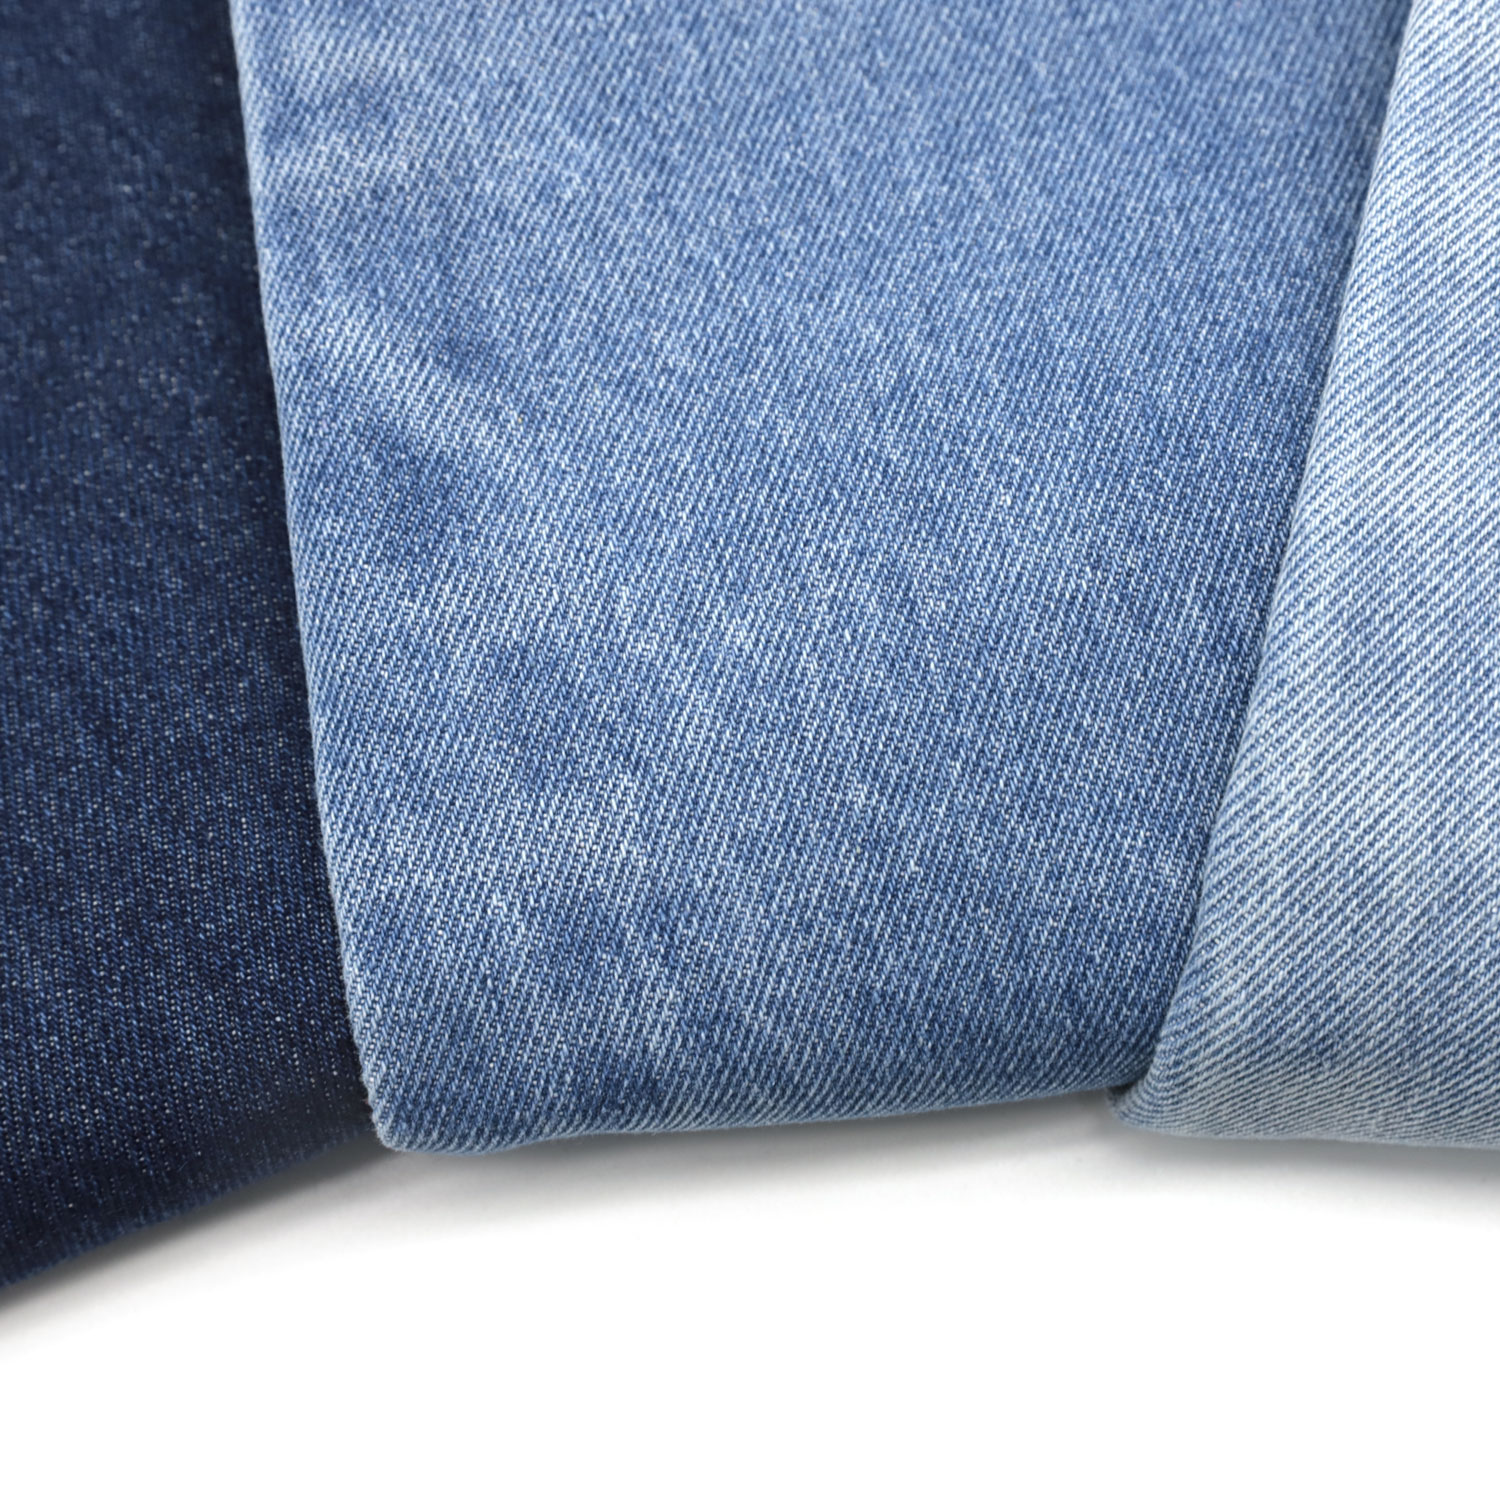 Why to Choose a Denim Material Fabric for Your Home 2